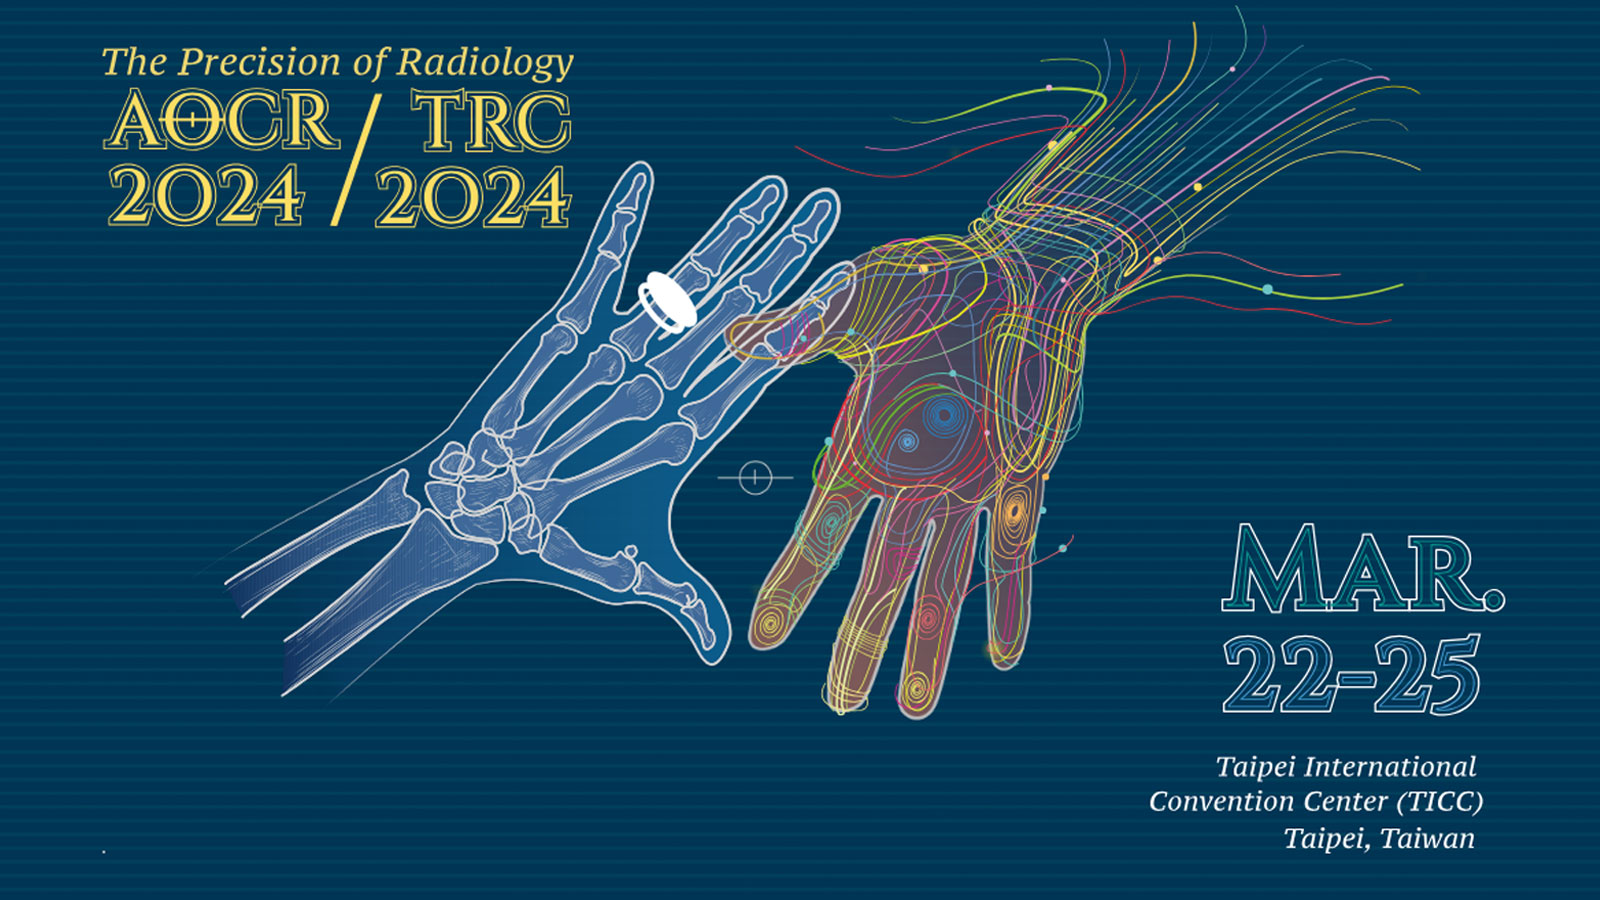 The 22nd Asian Oceanian Congress of Radiology (AOCR 2024)